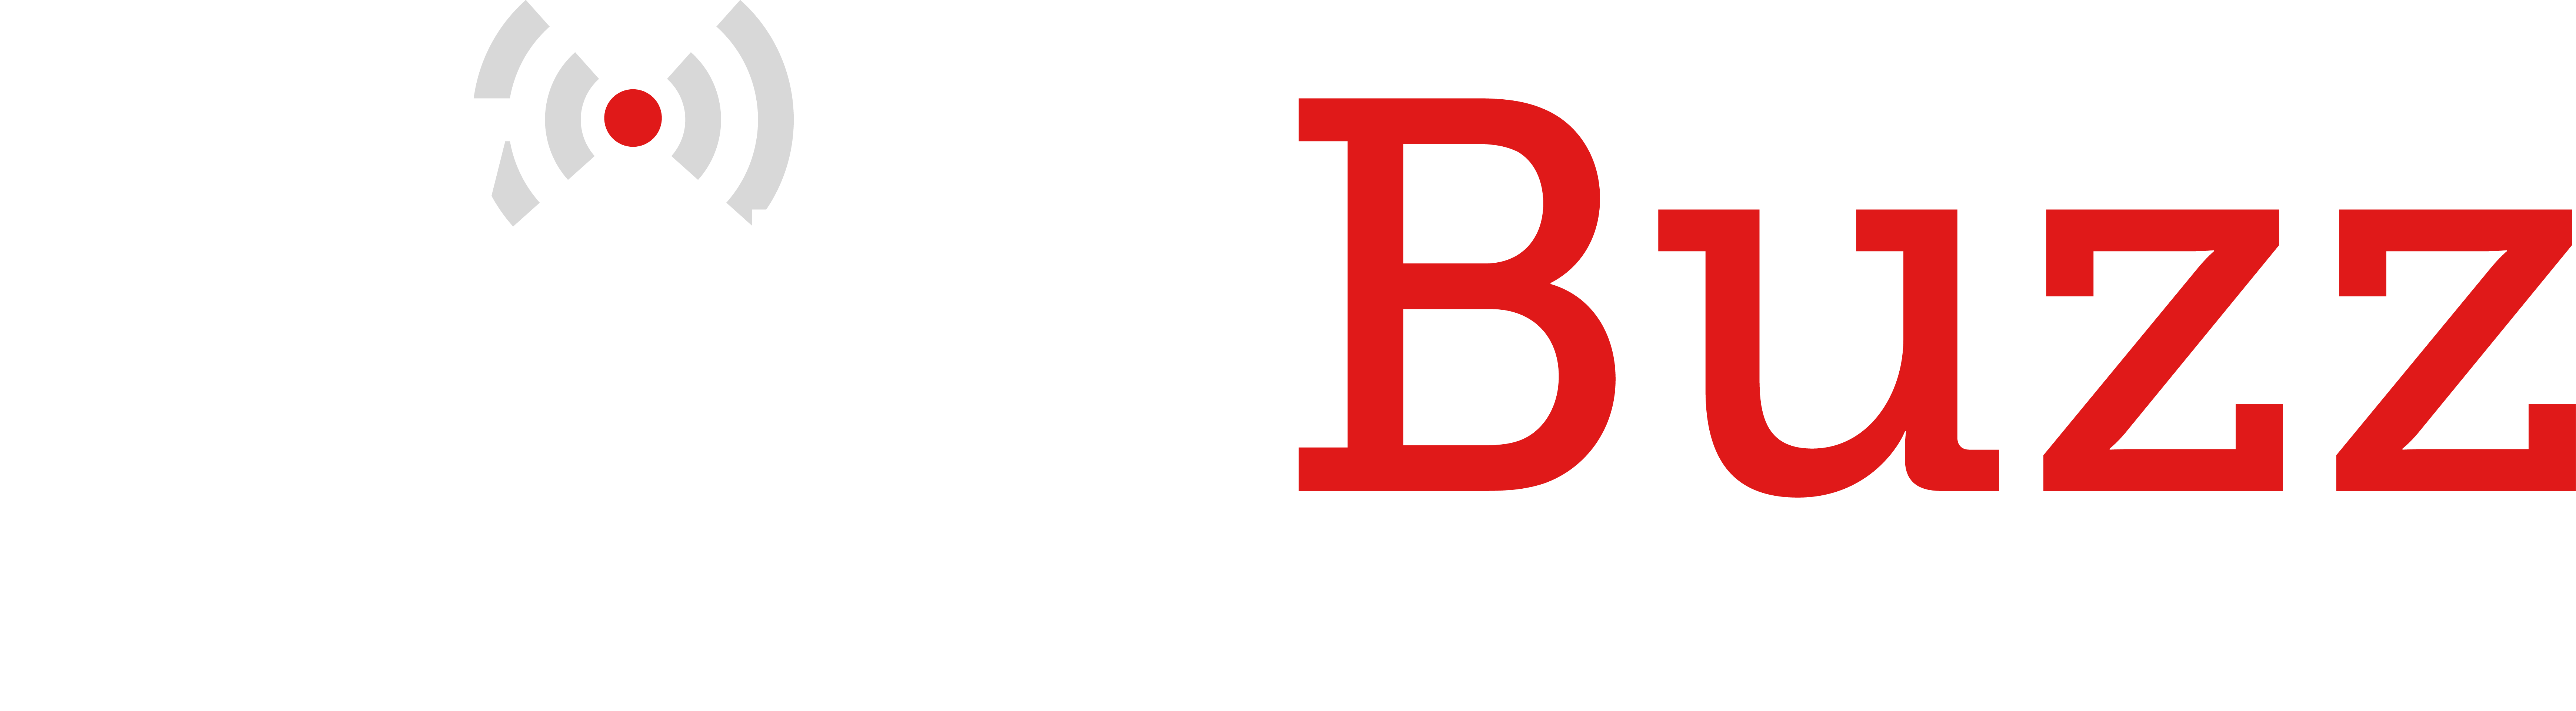 WireBuzz_Logo_White_and_Red_Text_With_Slogan.png